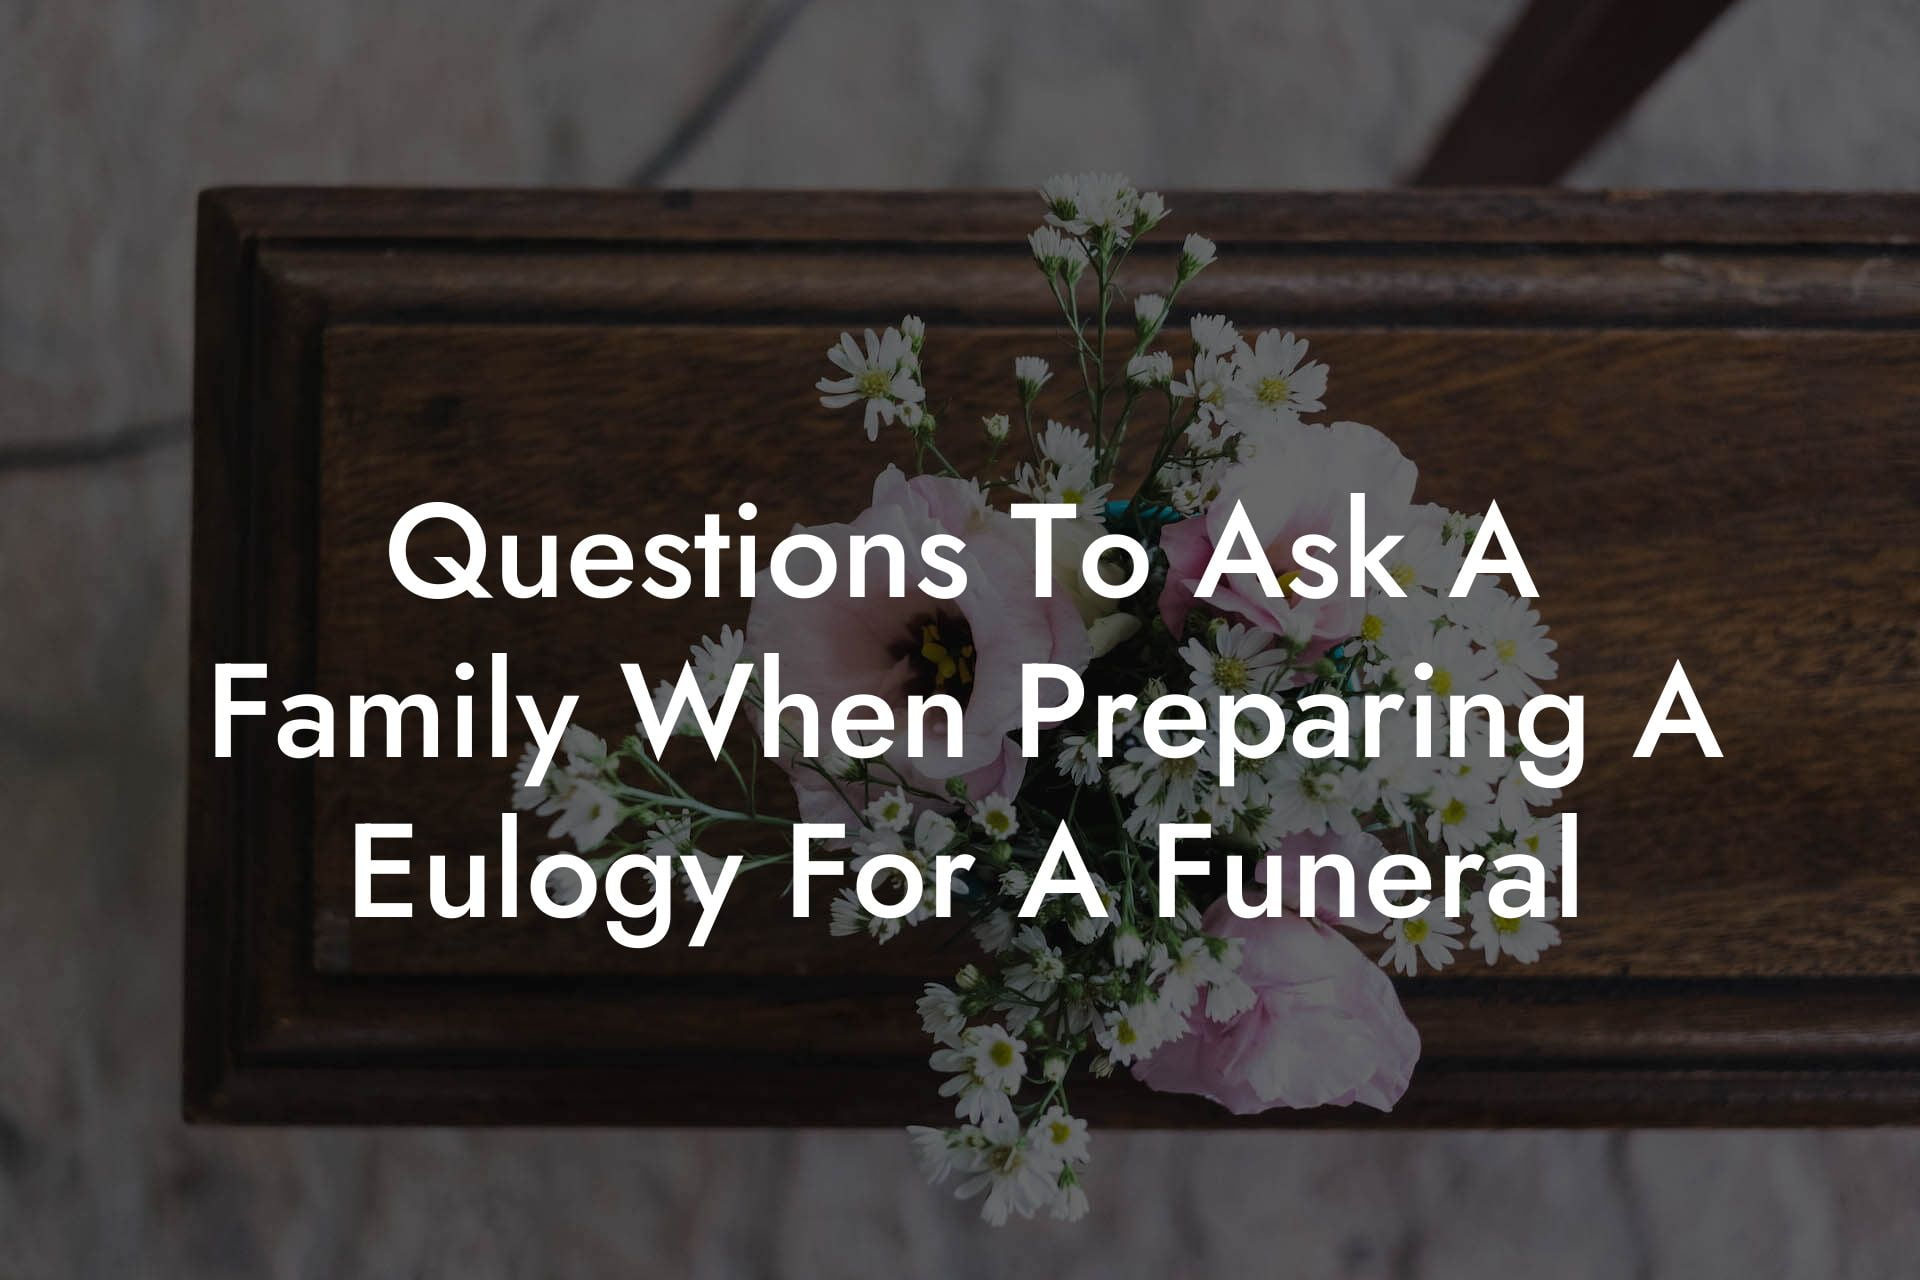 Questions To Ask A Family When Preparing A Eulogy For A Funeral